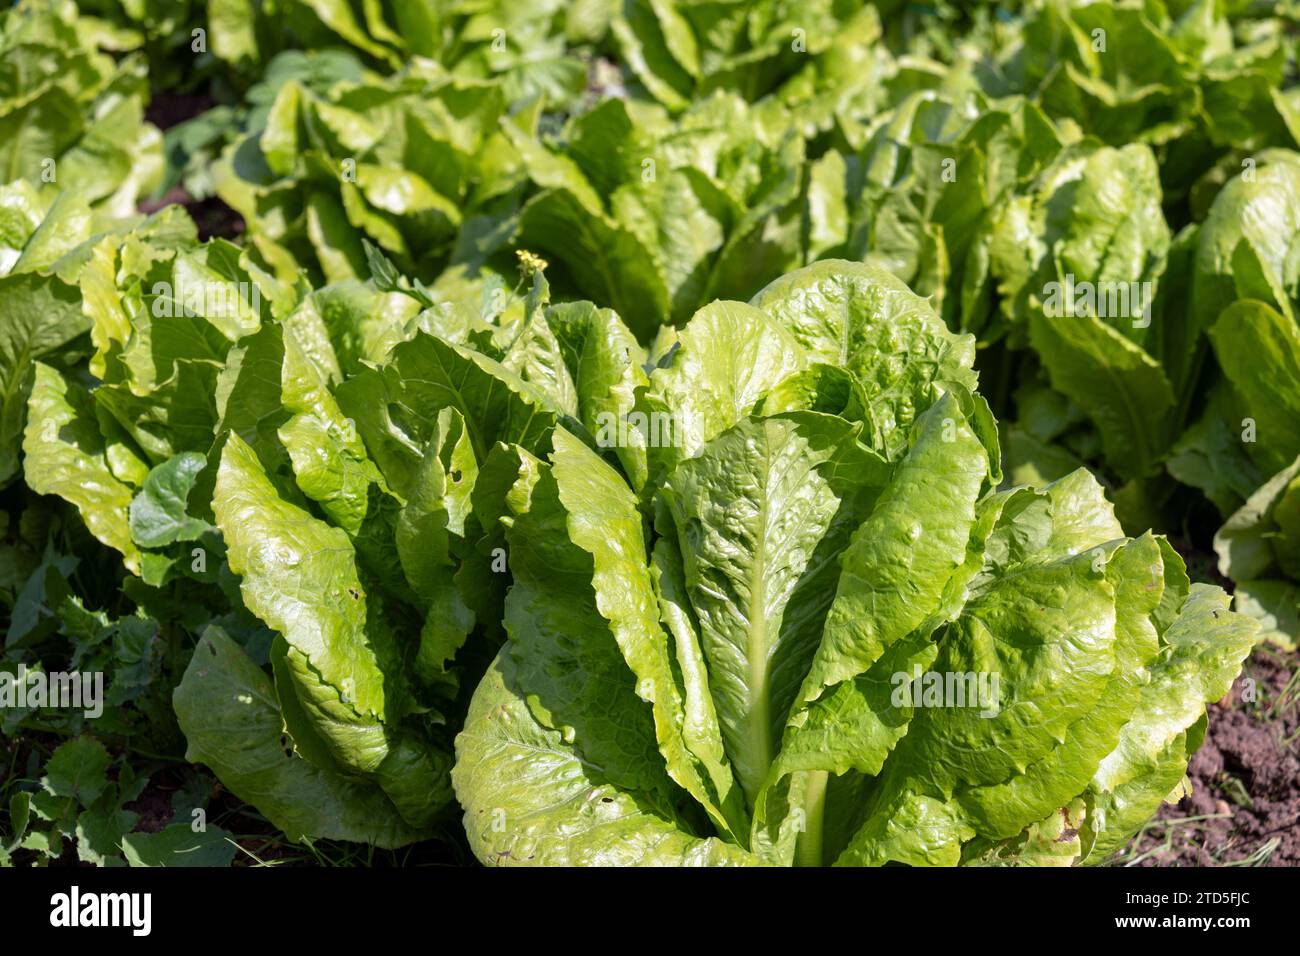 Organic lettuce growing in a traditional garden Stock Photo